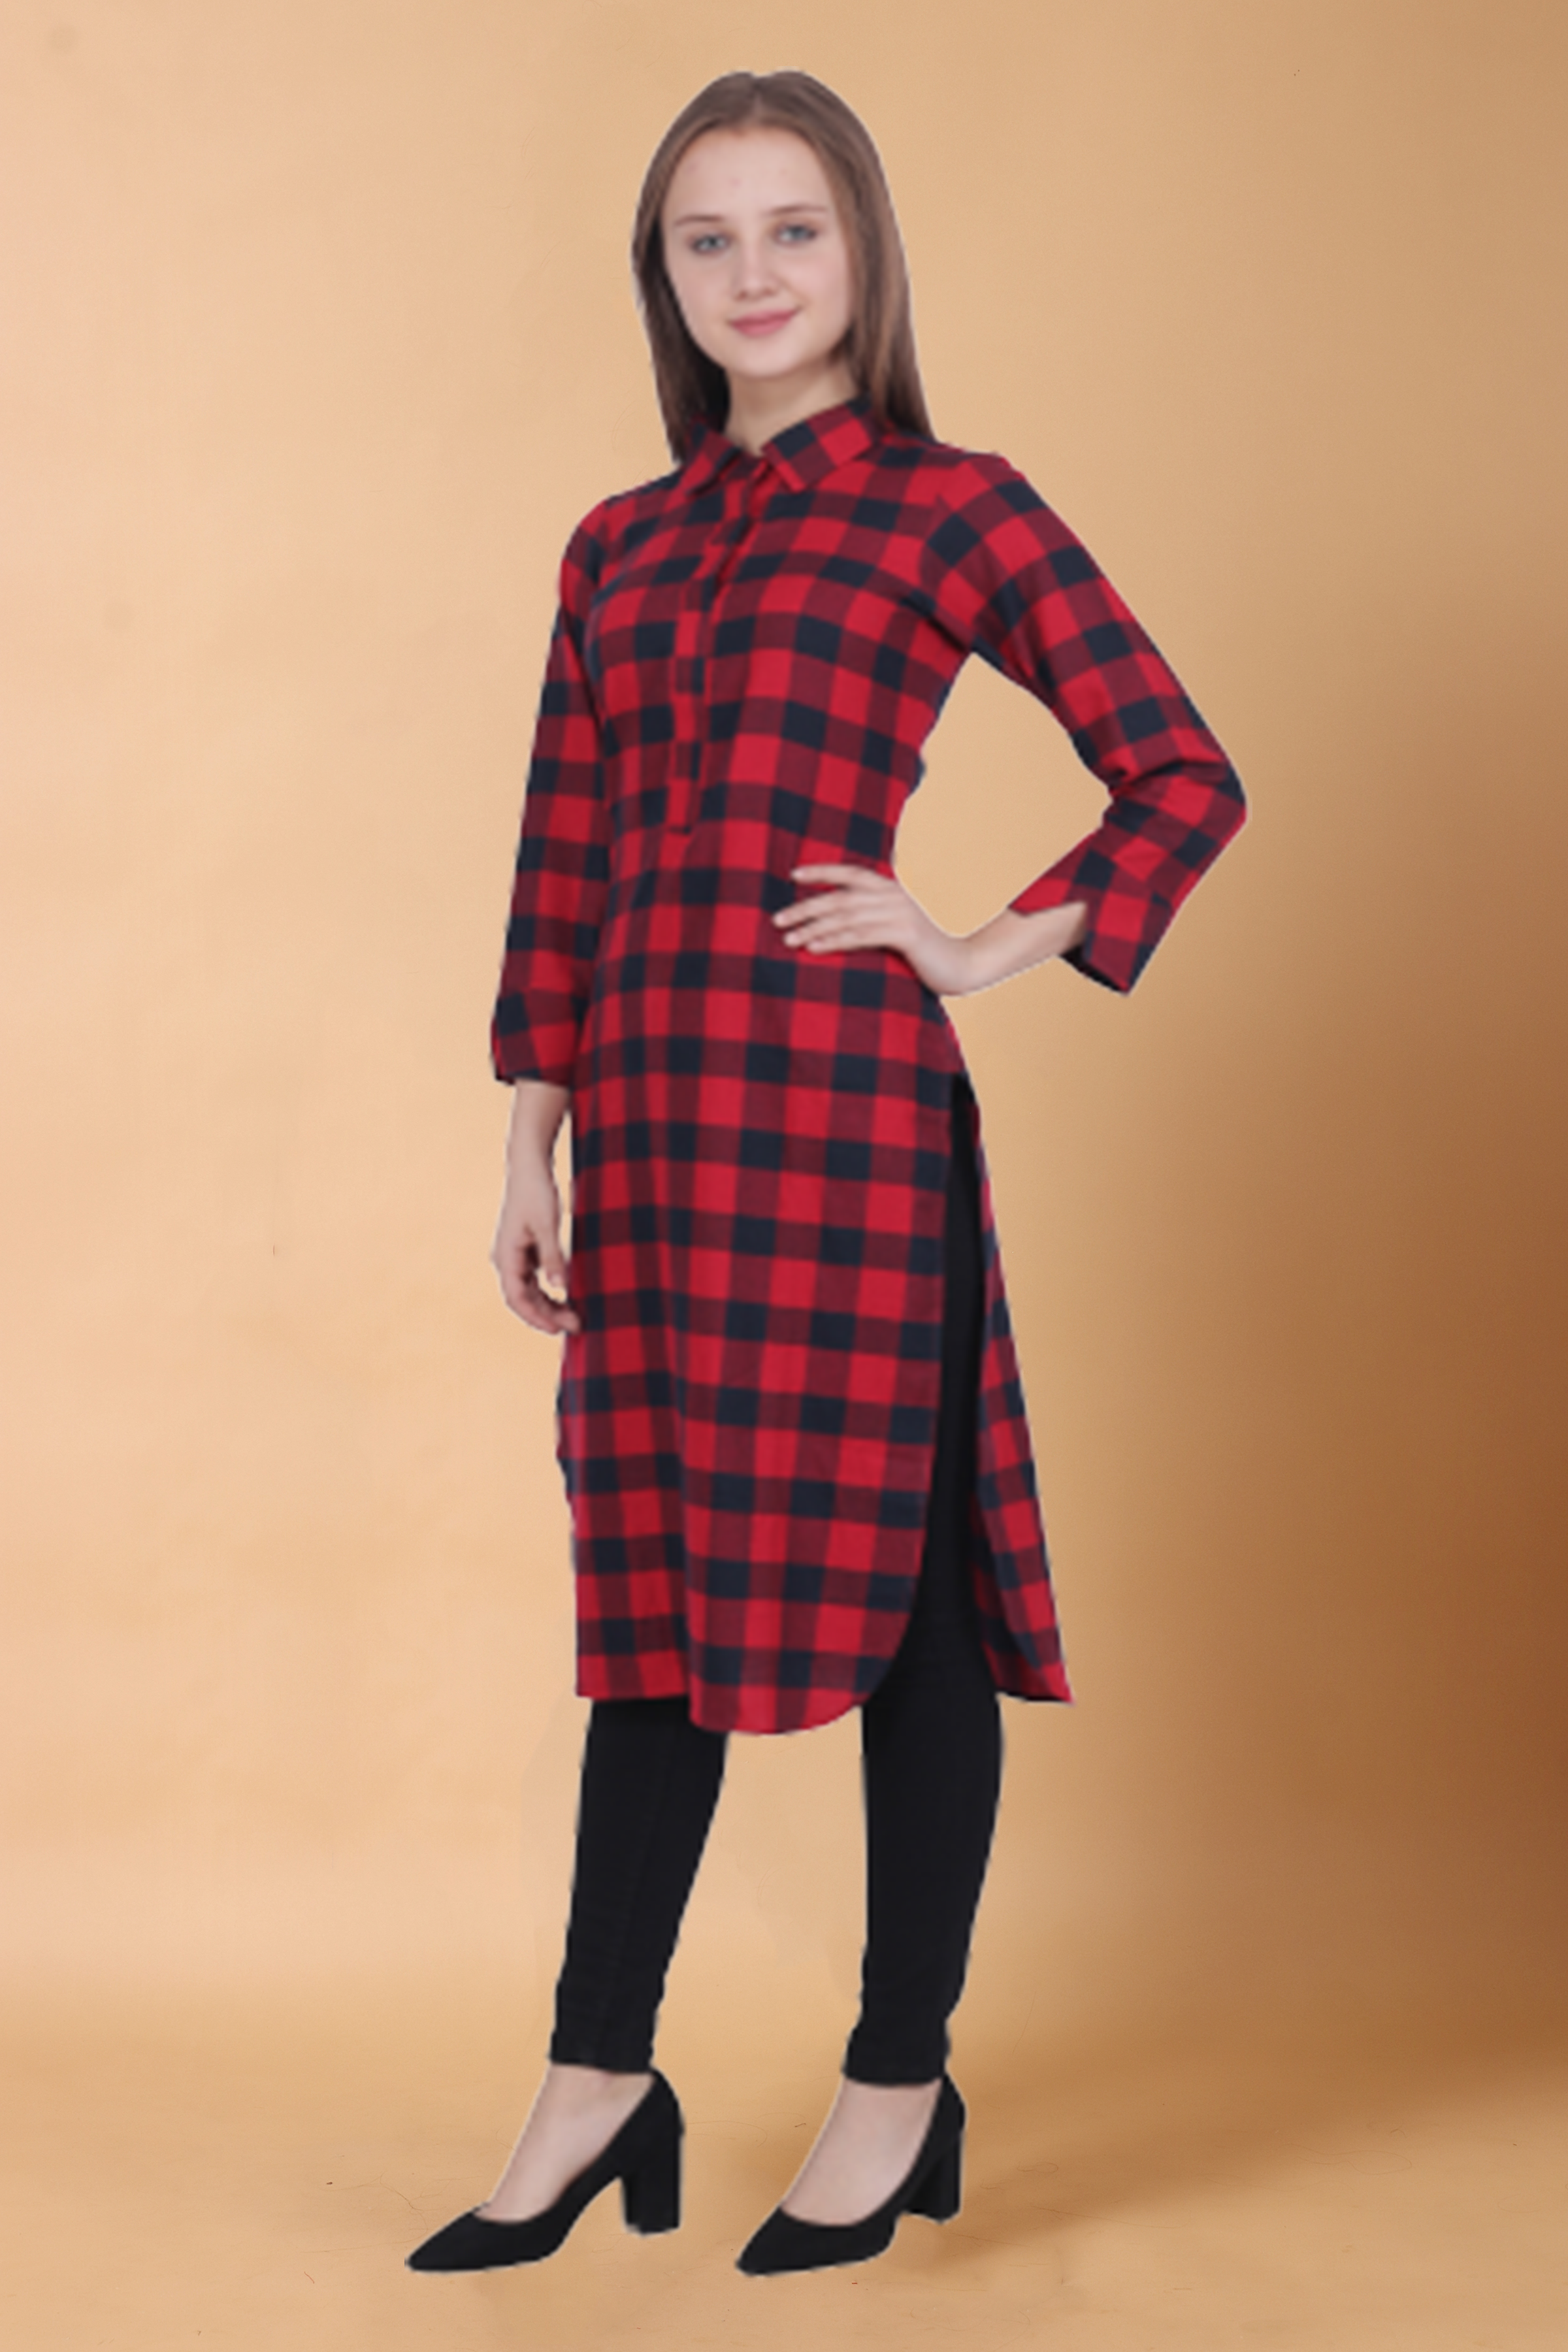 Buy Fashion Black Colour Winter Wear Woollen Kurti with Right Side Pockets  Front Design.Super Build Quality, at Amazon.in